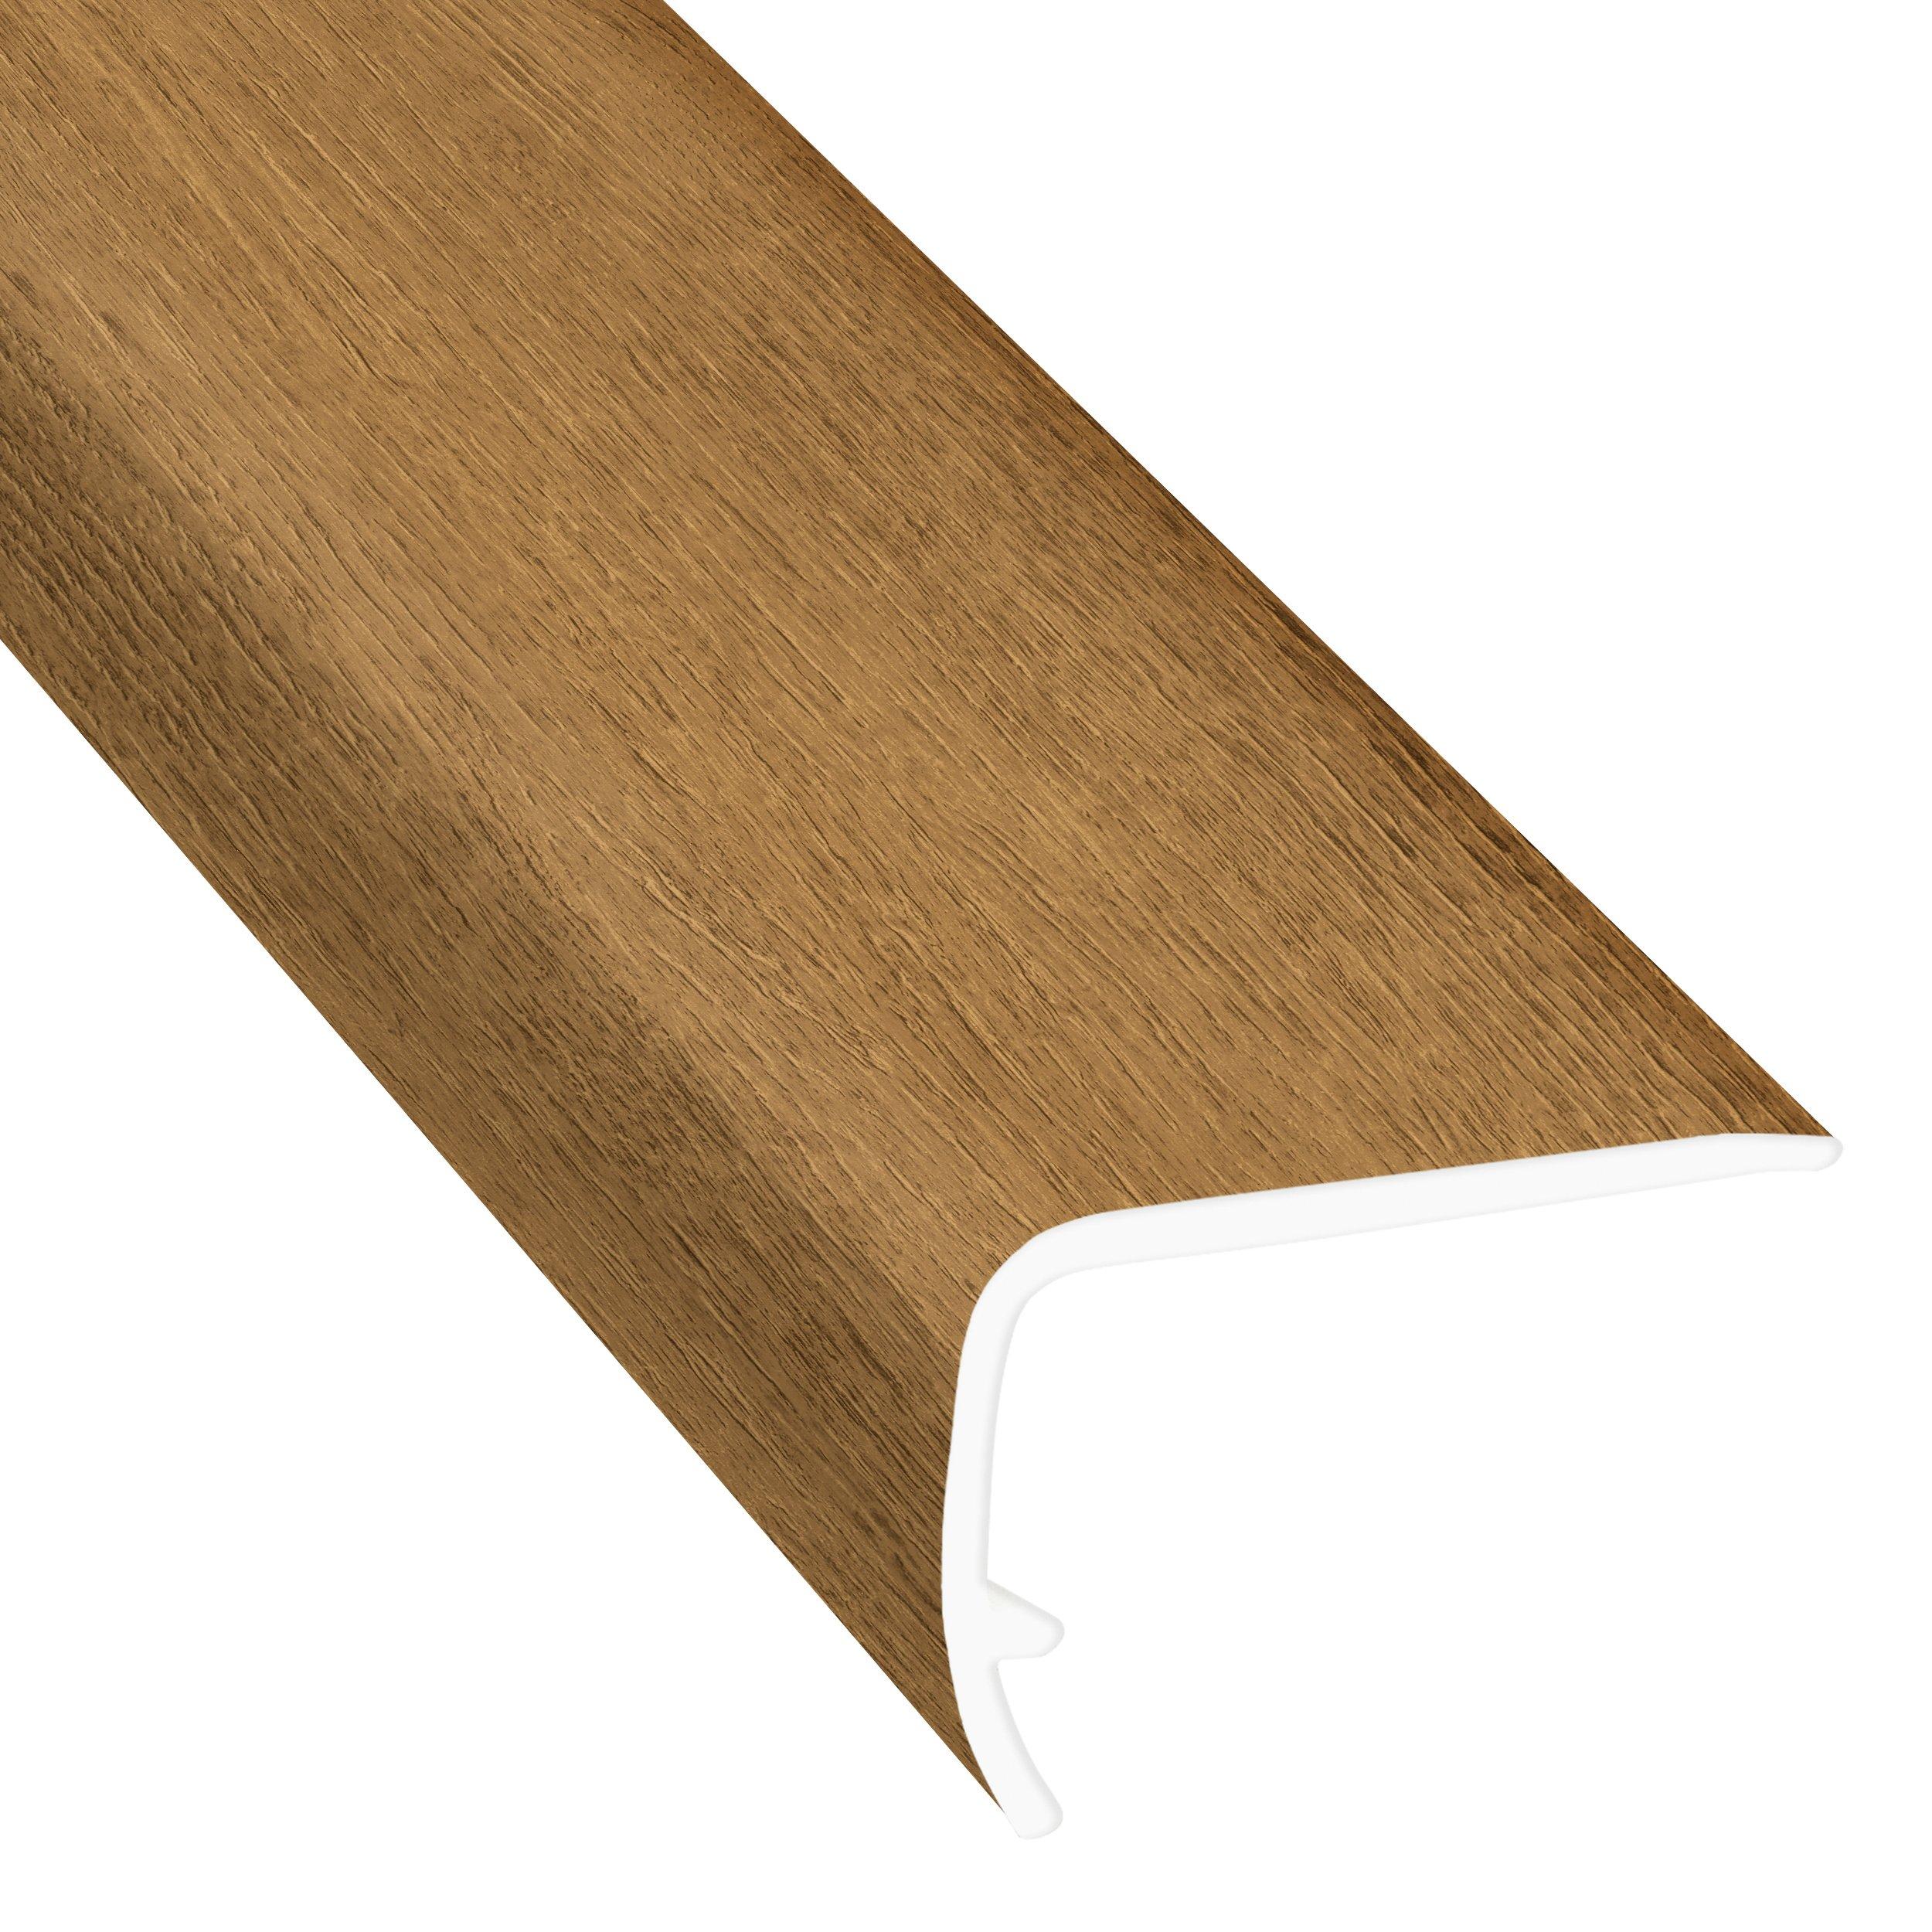 Kinston Knoll 94in. Vinyl Overlapping Stair Nose